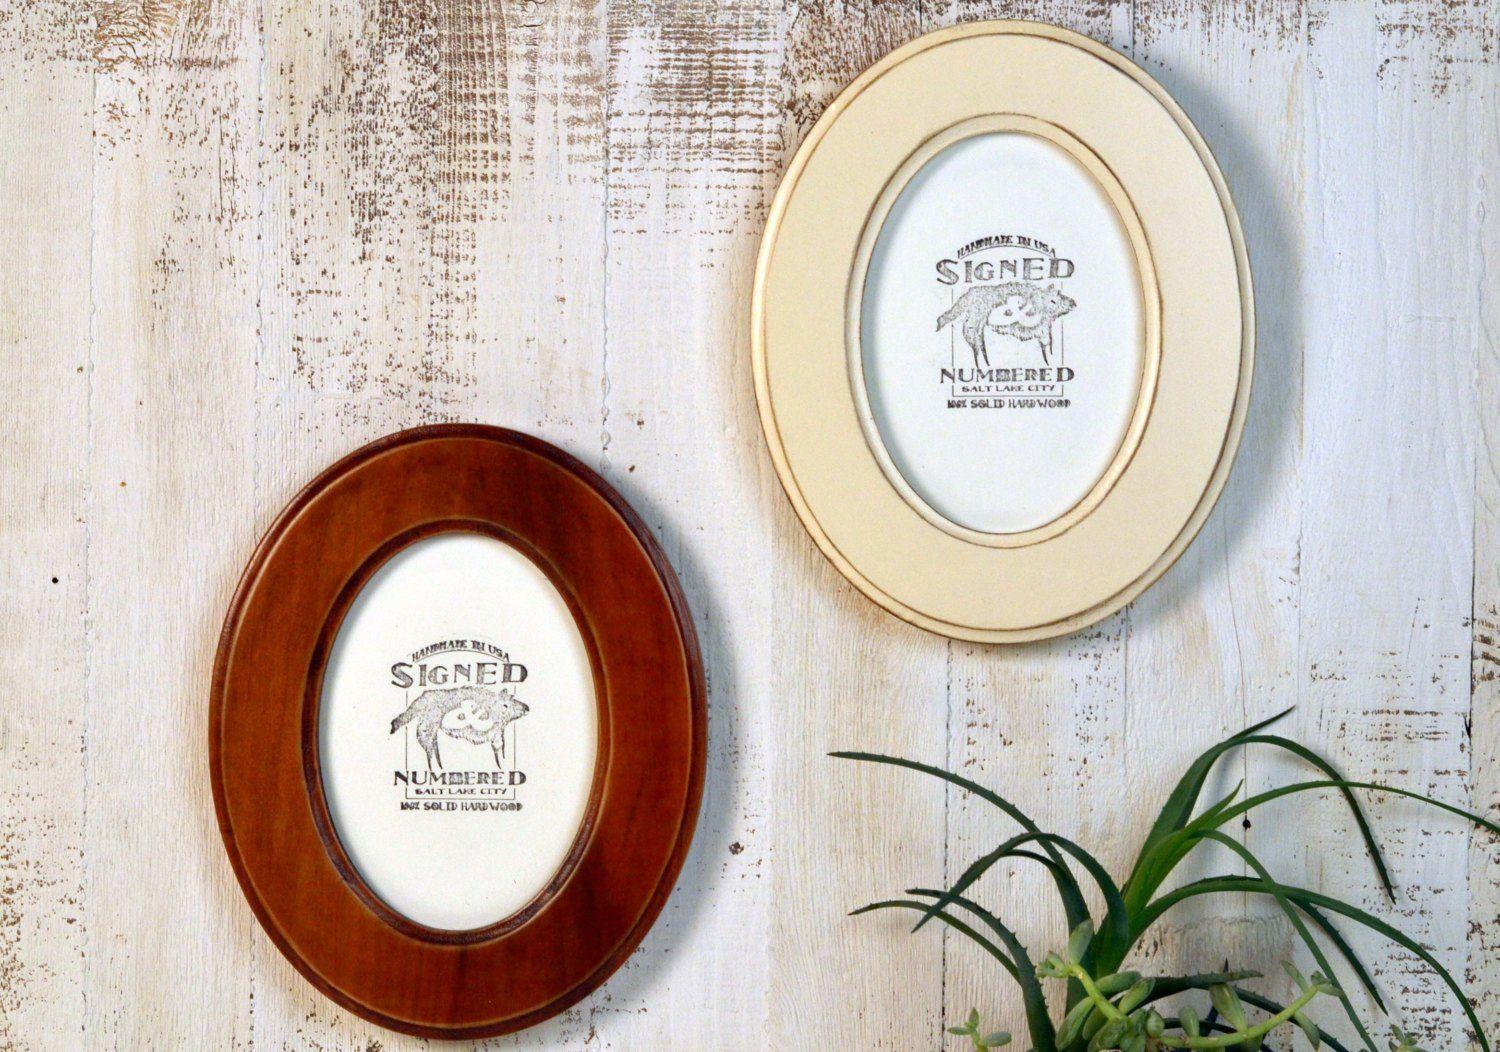 Ellipse-Shaped Logo - Oval Opening Picture Frame Oval Shaped Outside in Finish COLOR